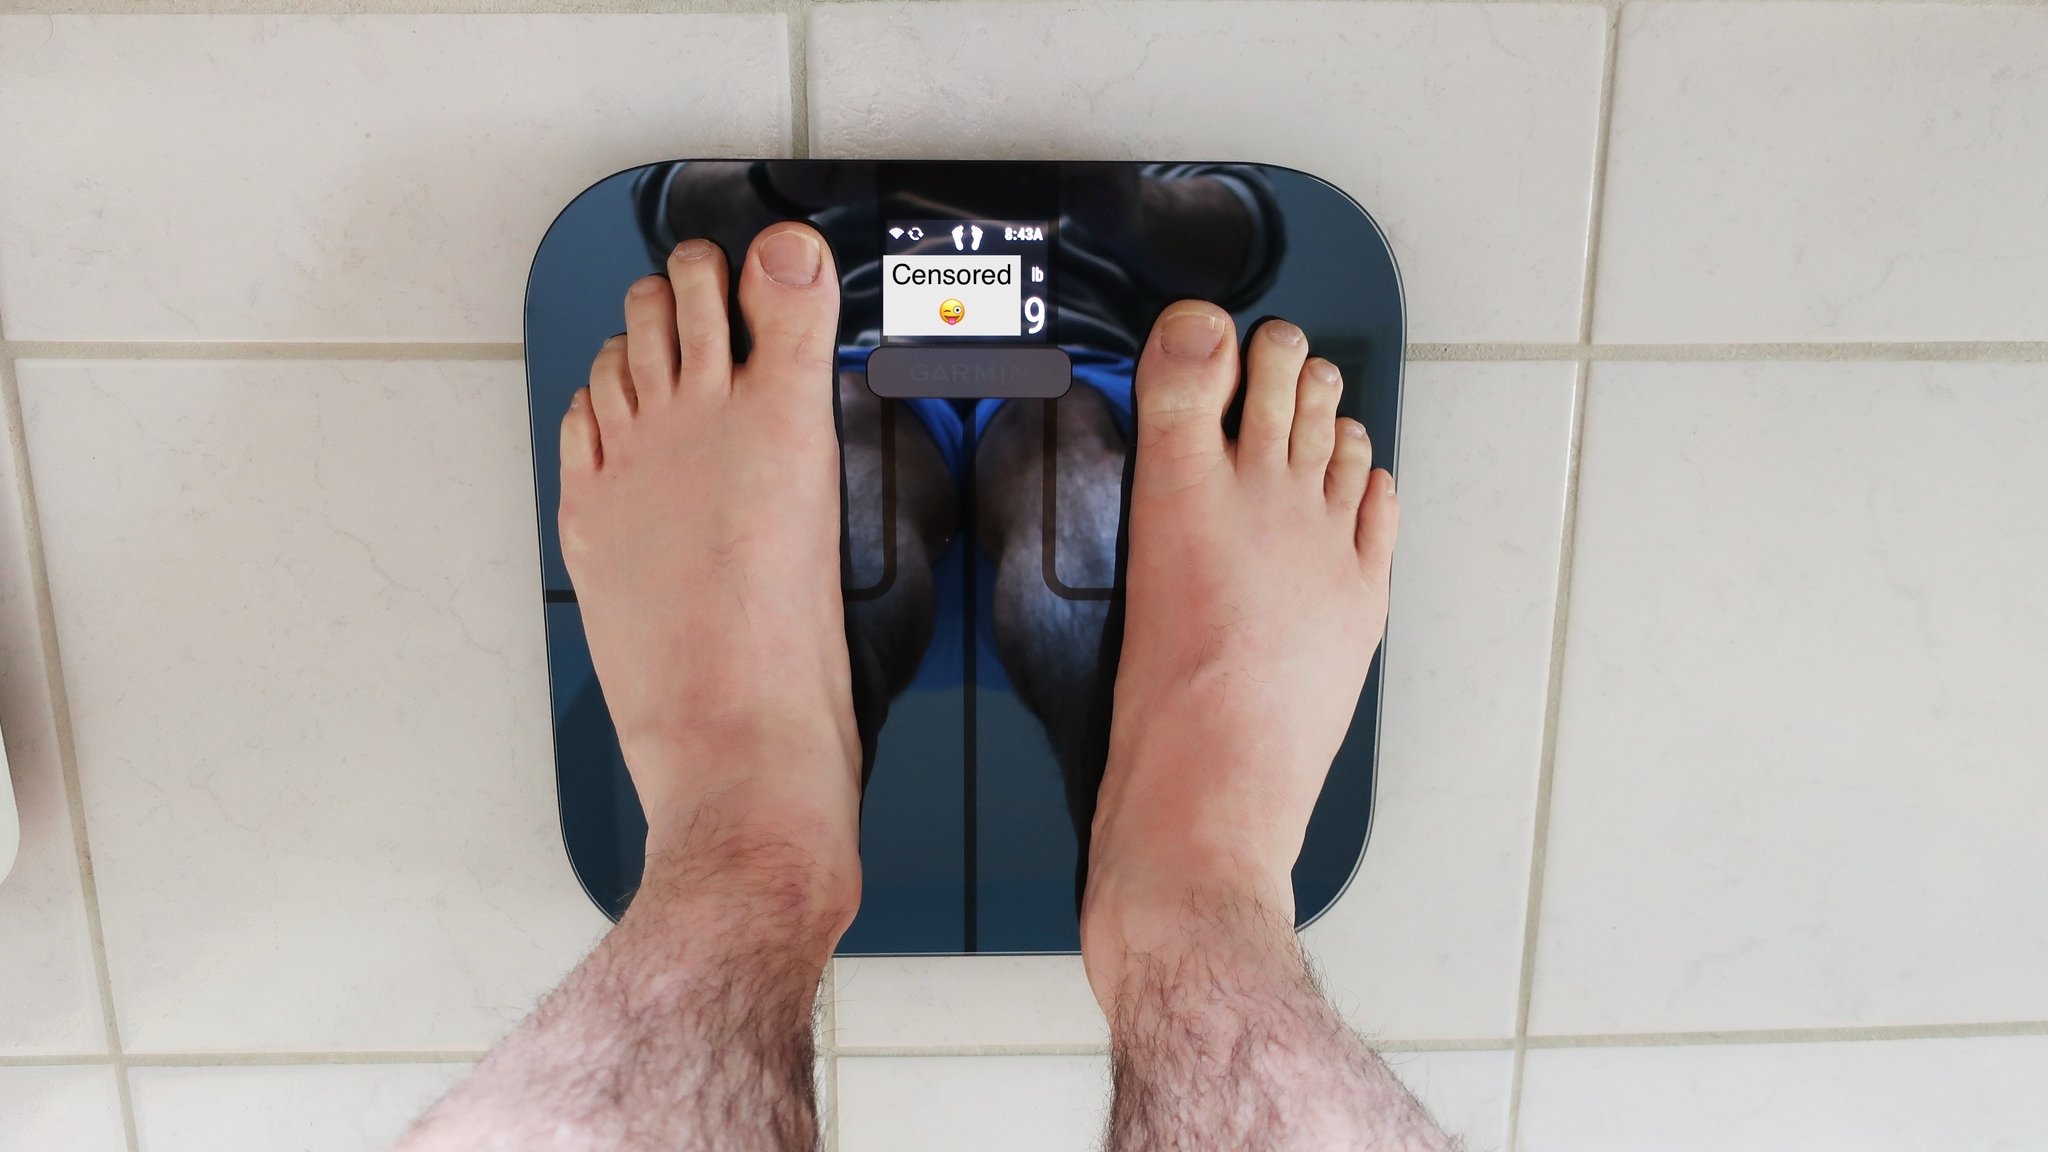 Garmin Index S2 Smart Scale review: Fantastic features at a premium price